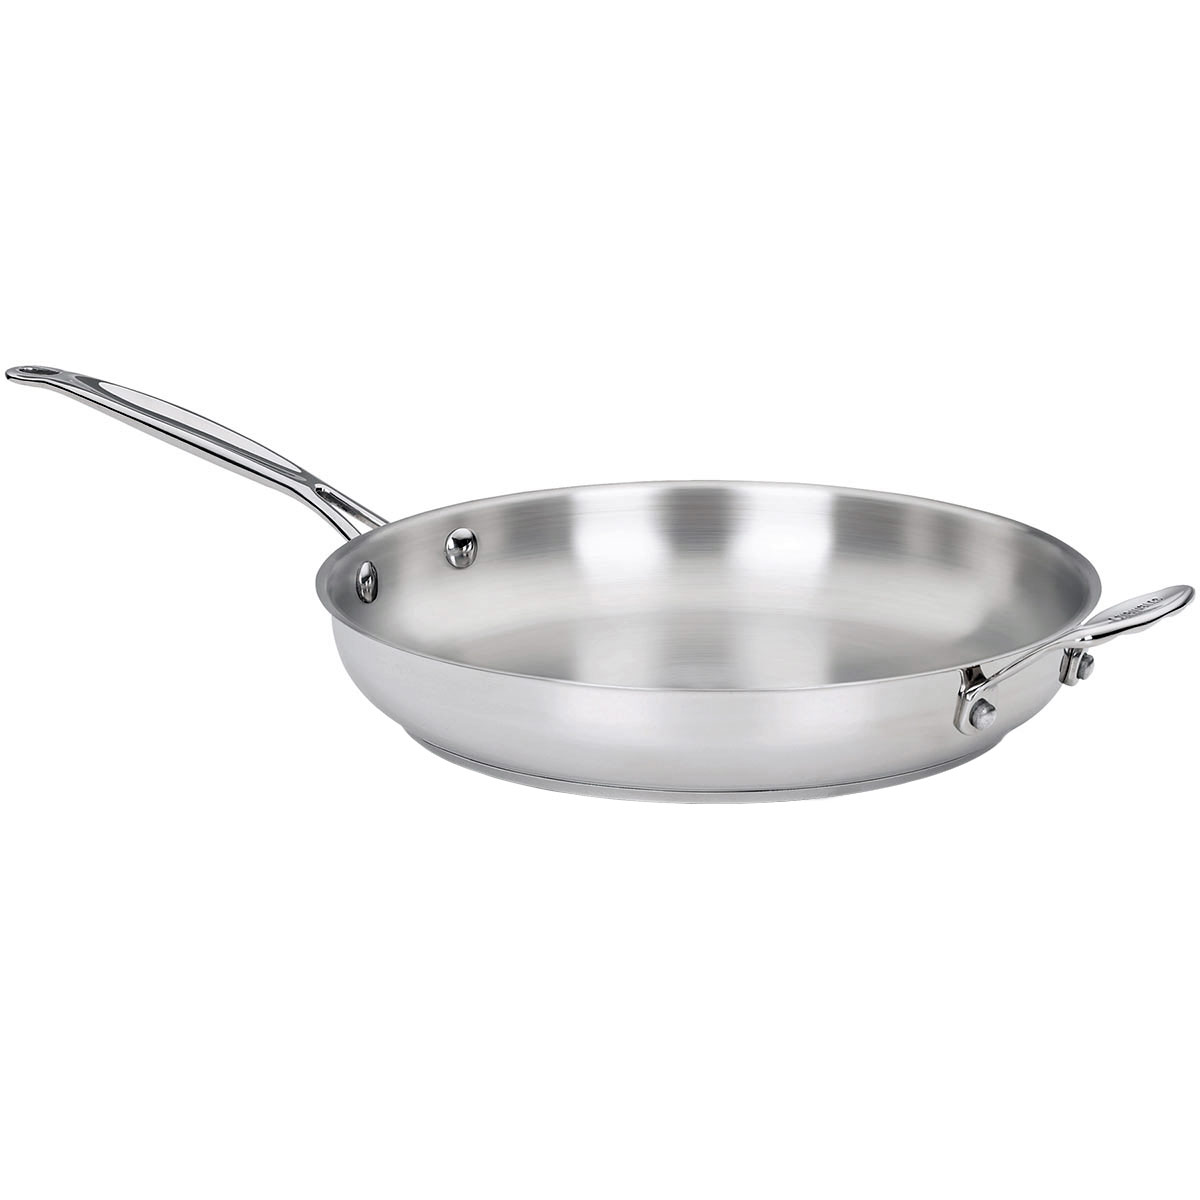 Cuisinart Chef's Classic Stainless Steel 12 Skillet with Glass Cover 